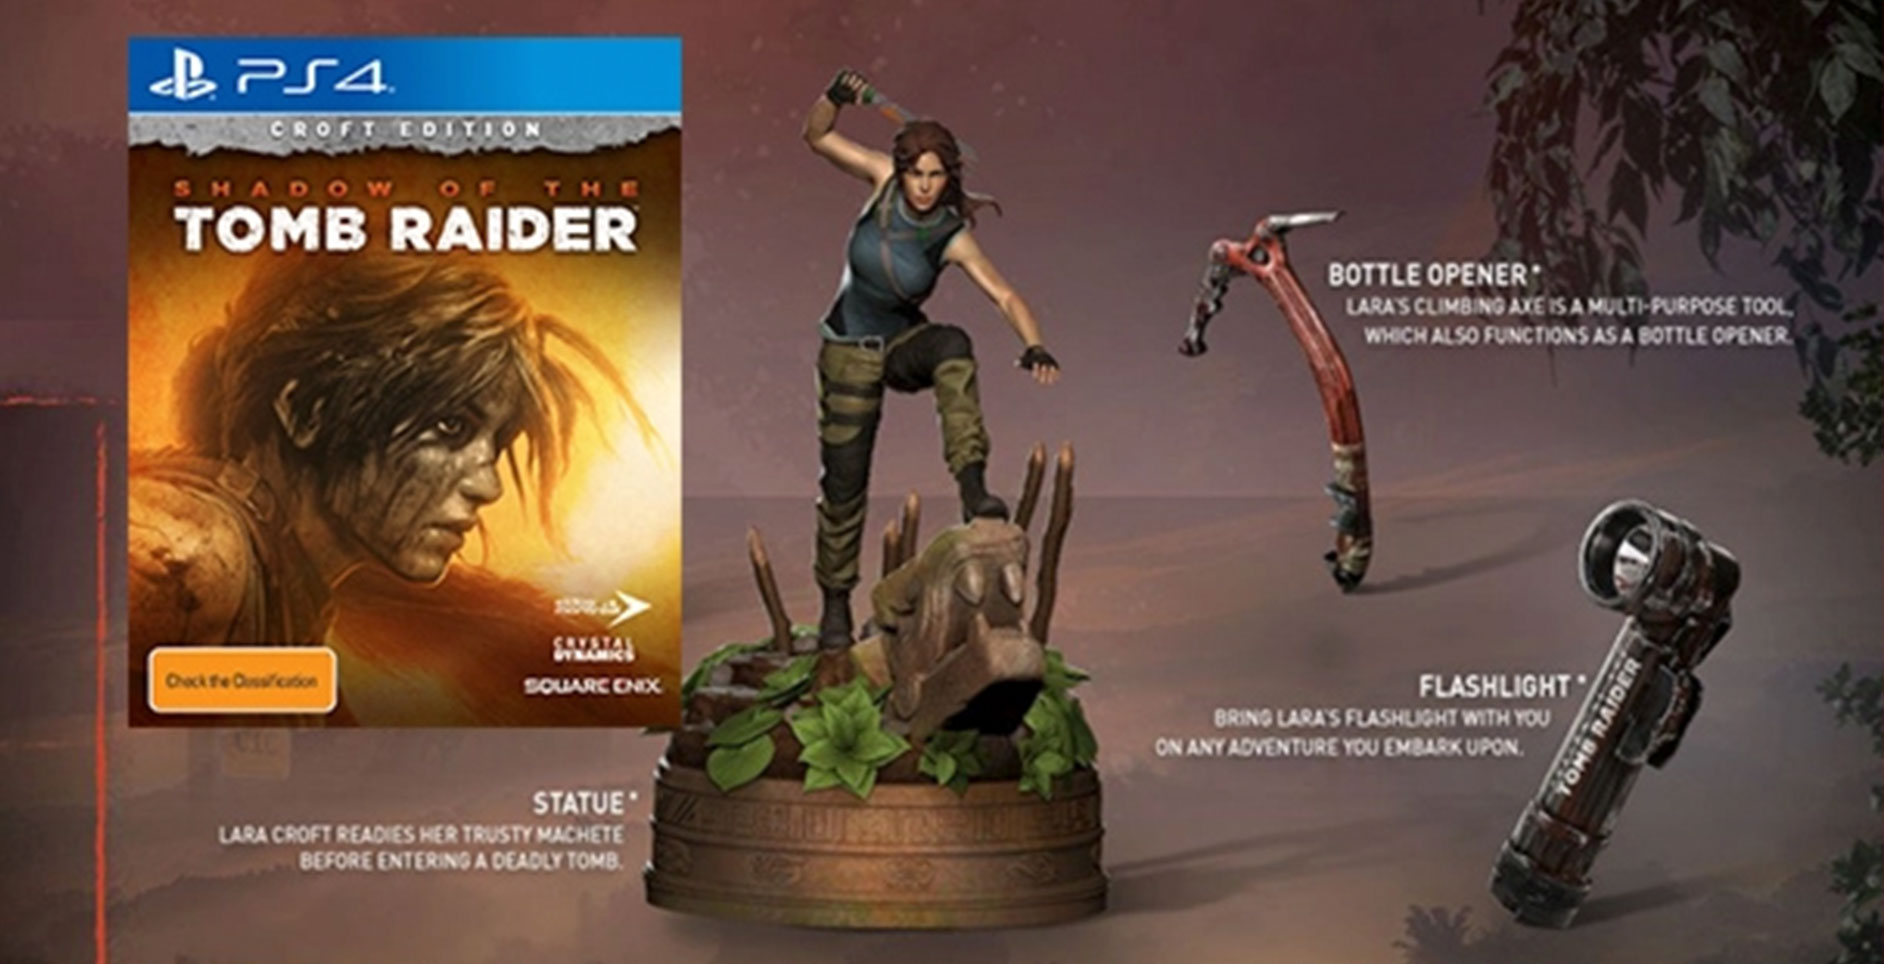 Shadow of the Tomb Raider - Croft Edition Extras